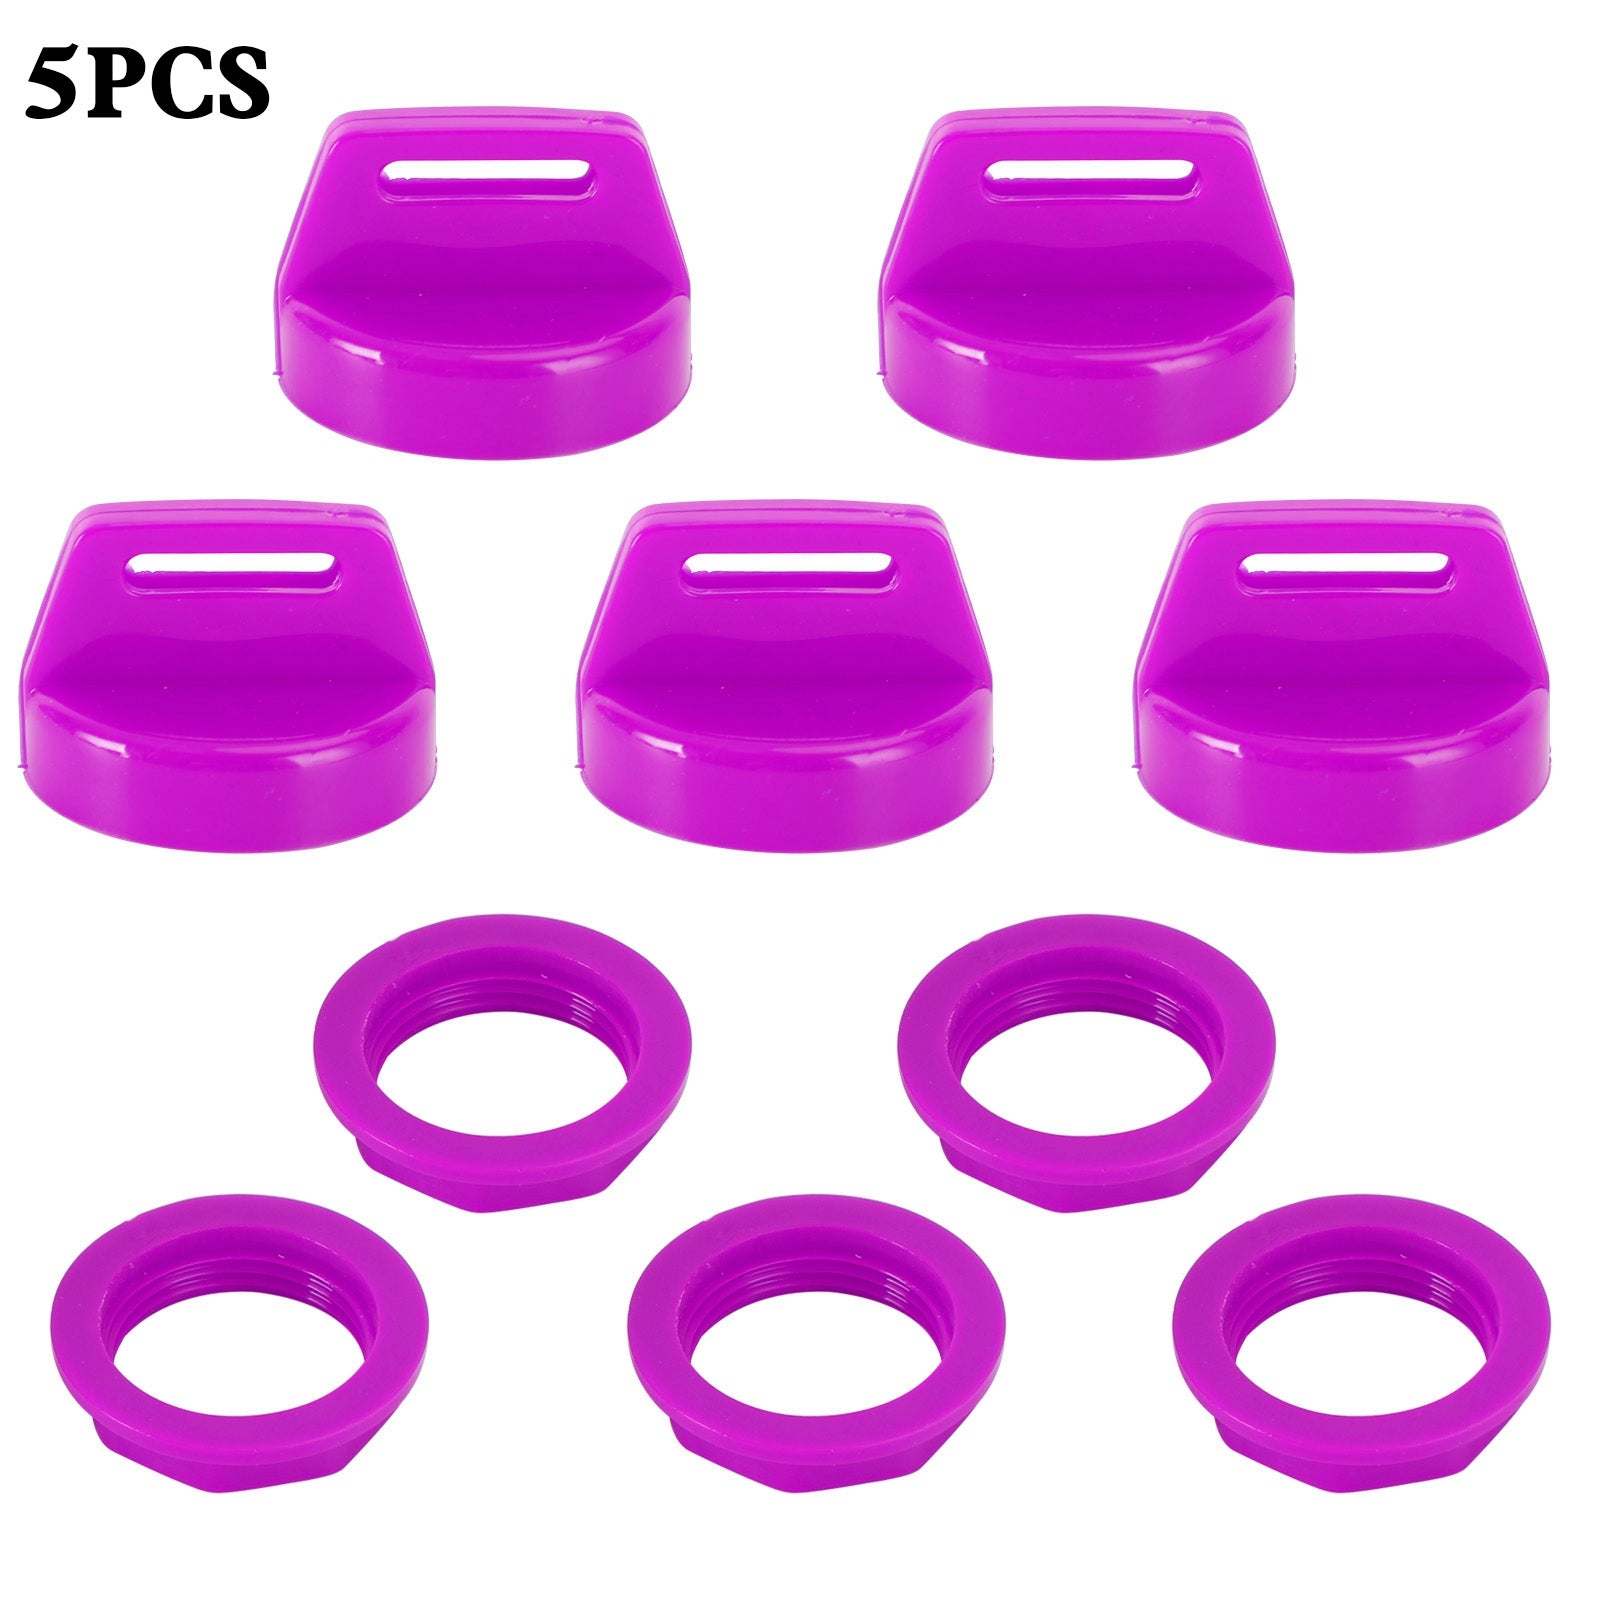 5x Ignition Key Cover 5433534 For Polaris Switchback 800 Rush 600 Pro RMK Violet Generic